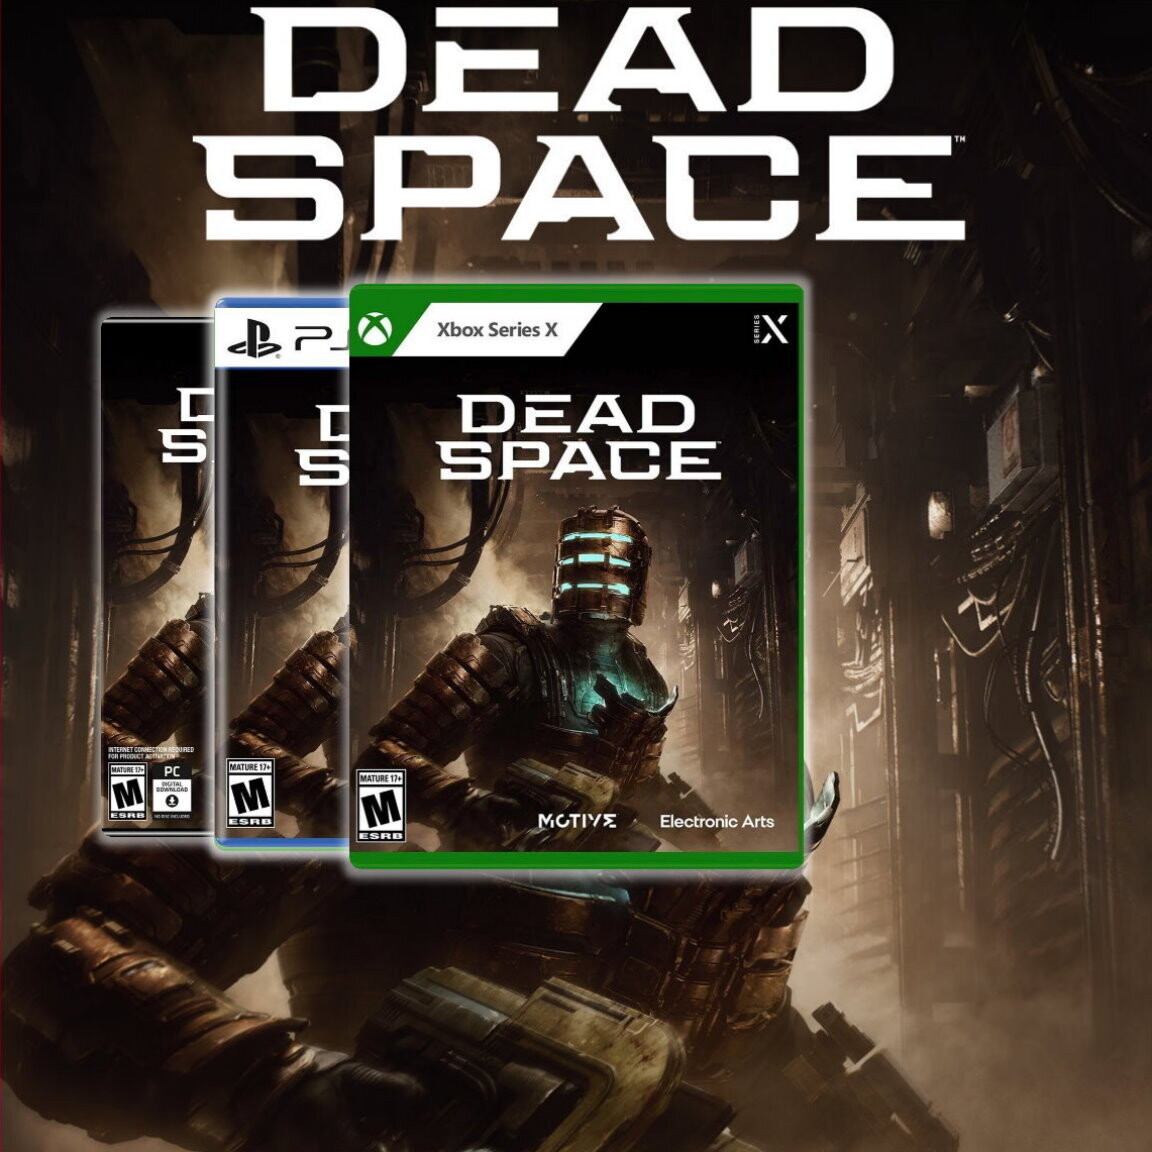  Dead Space - Xbox Series X : Electronic Arts: Video Games